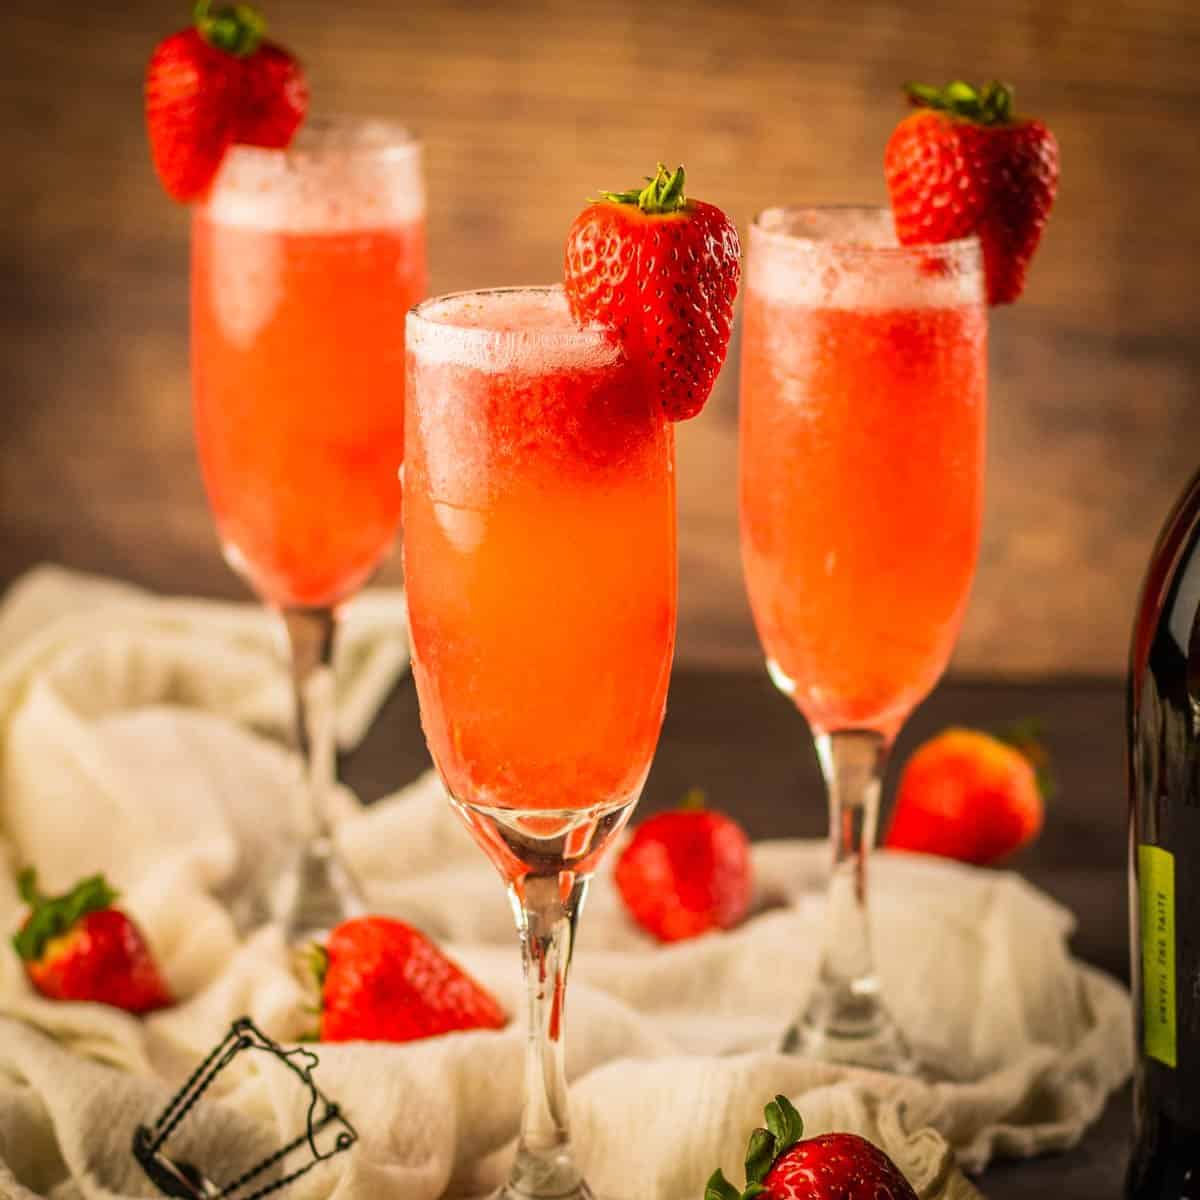 three champagne flutes filled with prosecco and strawberry puree and garnished with fresh strawberry